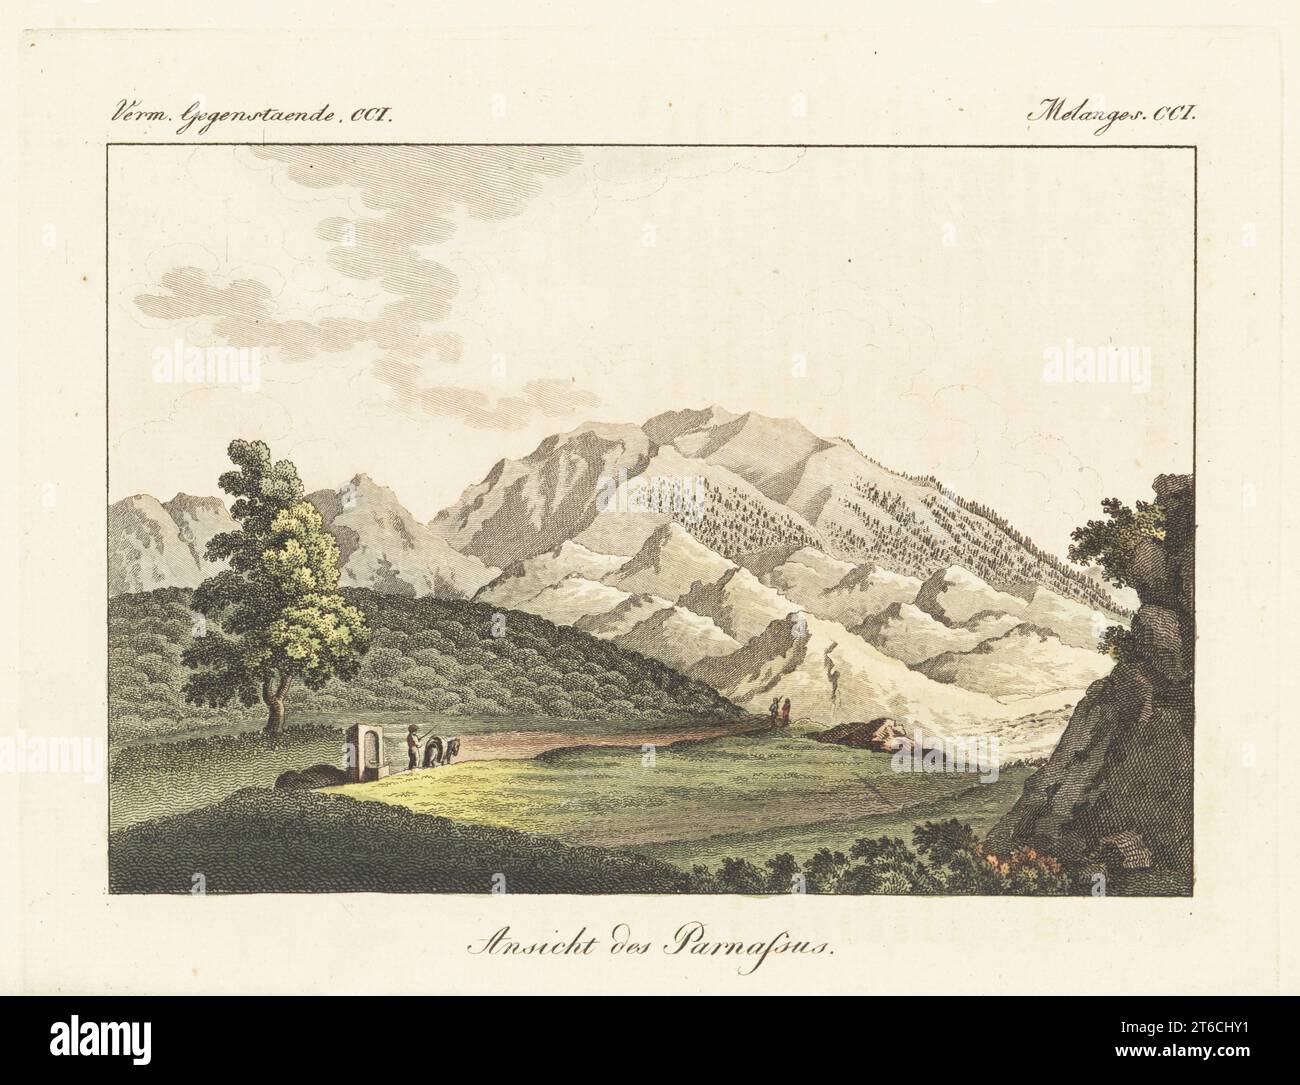 View of Mount Parnassus in Greece from near Delphi on the road to Livadia. A peasant with donkey next to the fountain of Castalia, a spring sacred to the Muses. Ansicht des Parnassus. Handcoloured copperplate engraving from Carl Bertuch's Bilderbuch fur Kinder (Picture Book for Children), Weimar, 1815. A 12-volume encyclopedia for children illustrated with almost 1,200 engraved plates on natural history, science, costume, mythology, etc., published from 1790-1830. Stock Photo